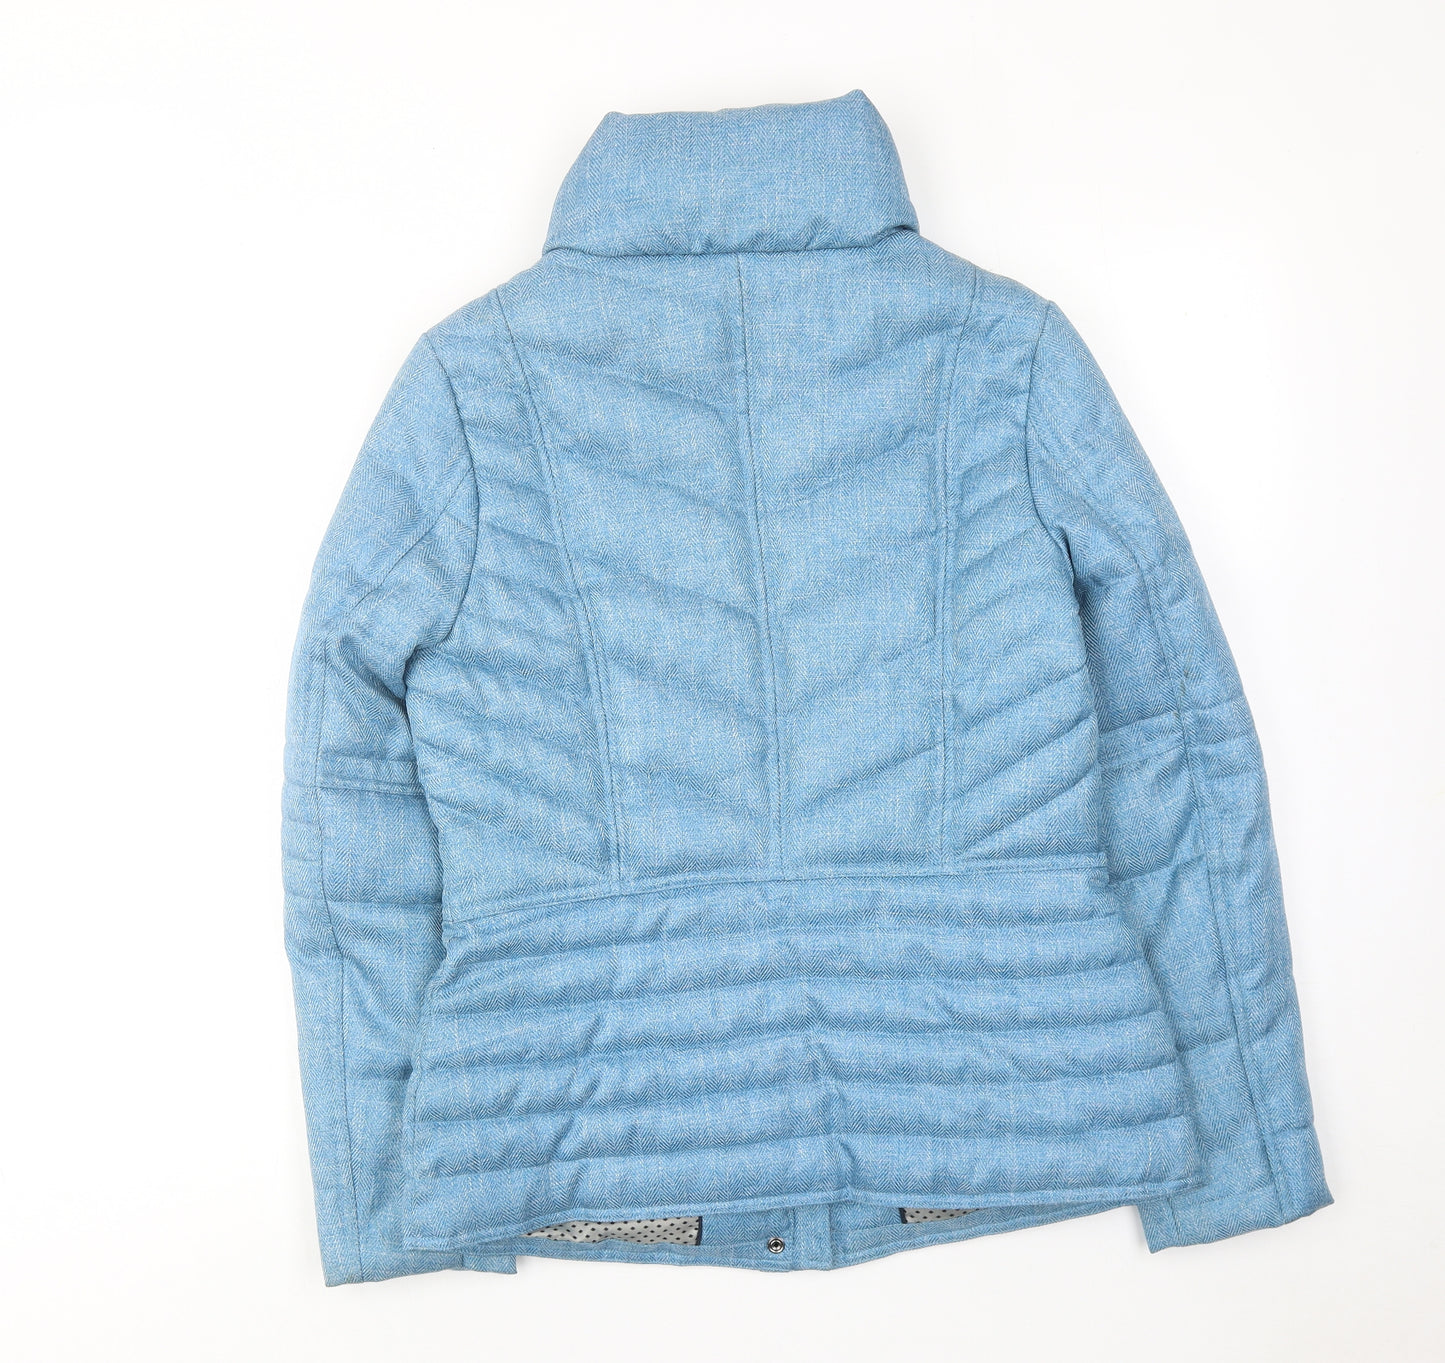 NEXT Womens Blue Quilted Jacket Size 10 Zip